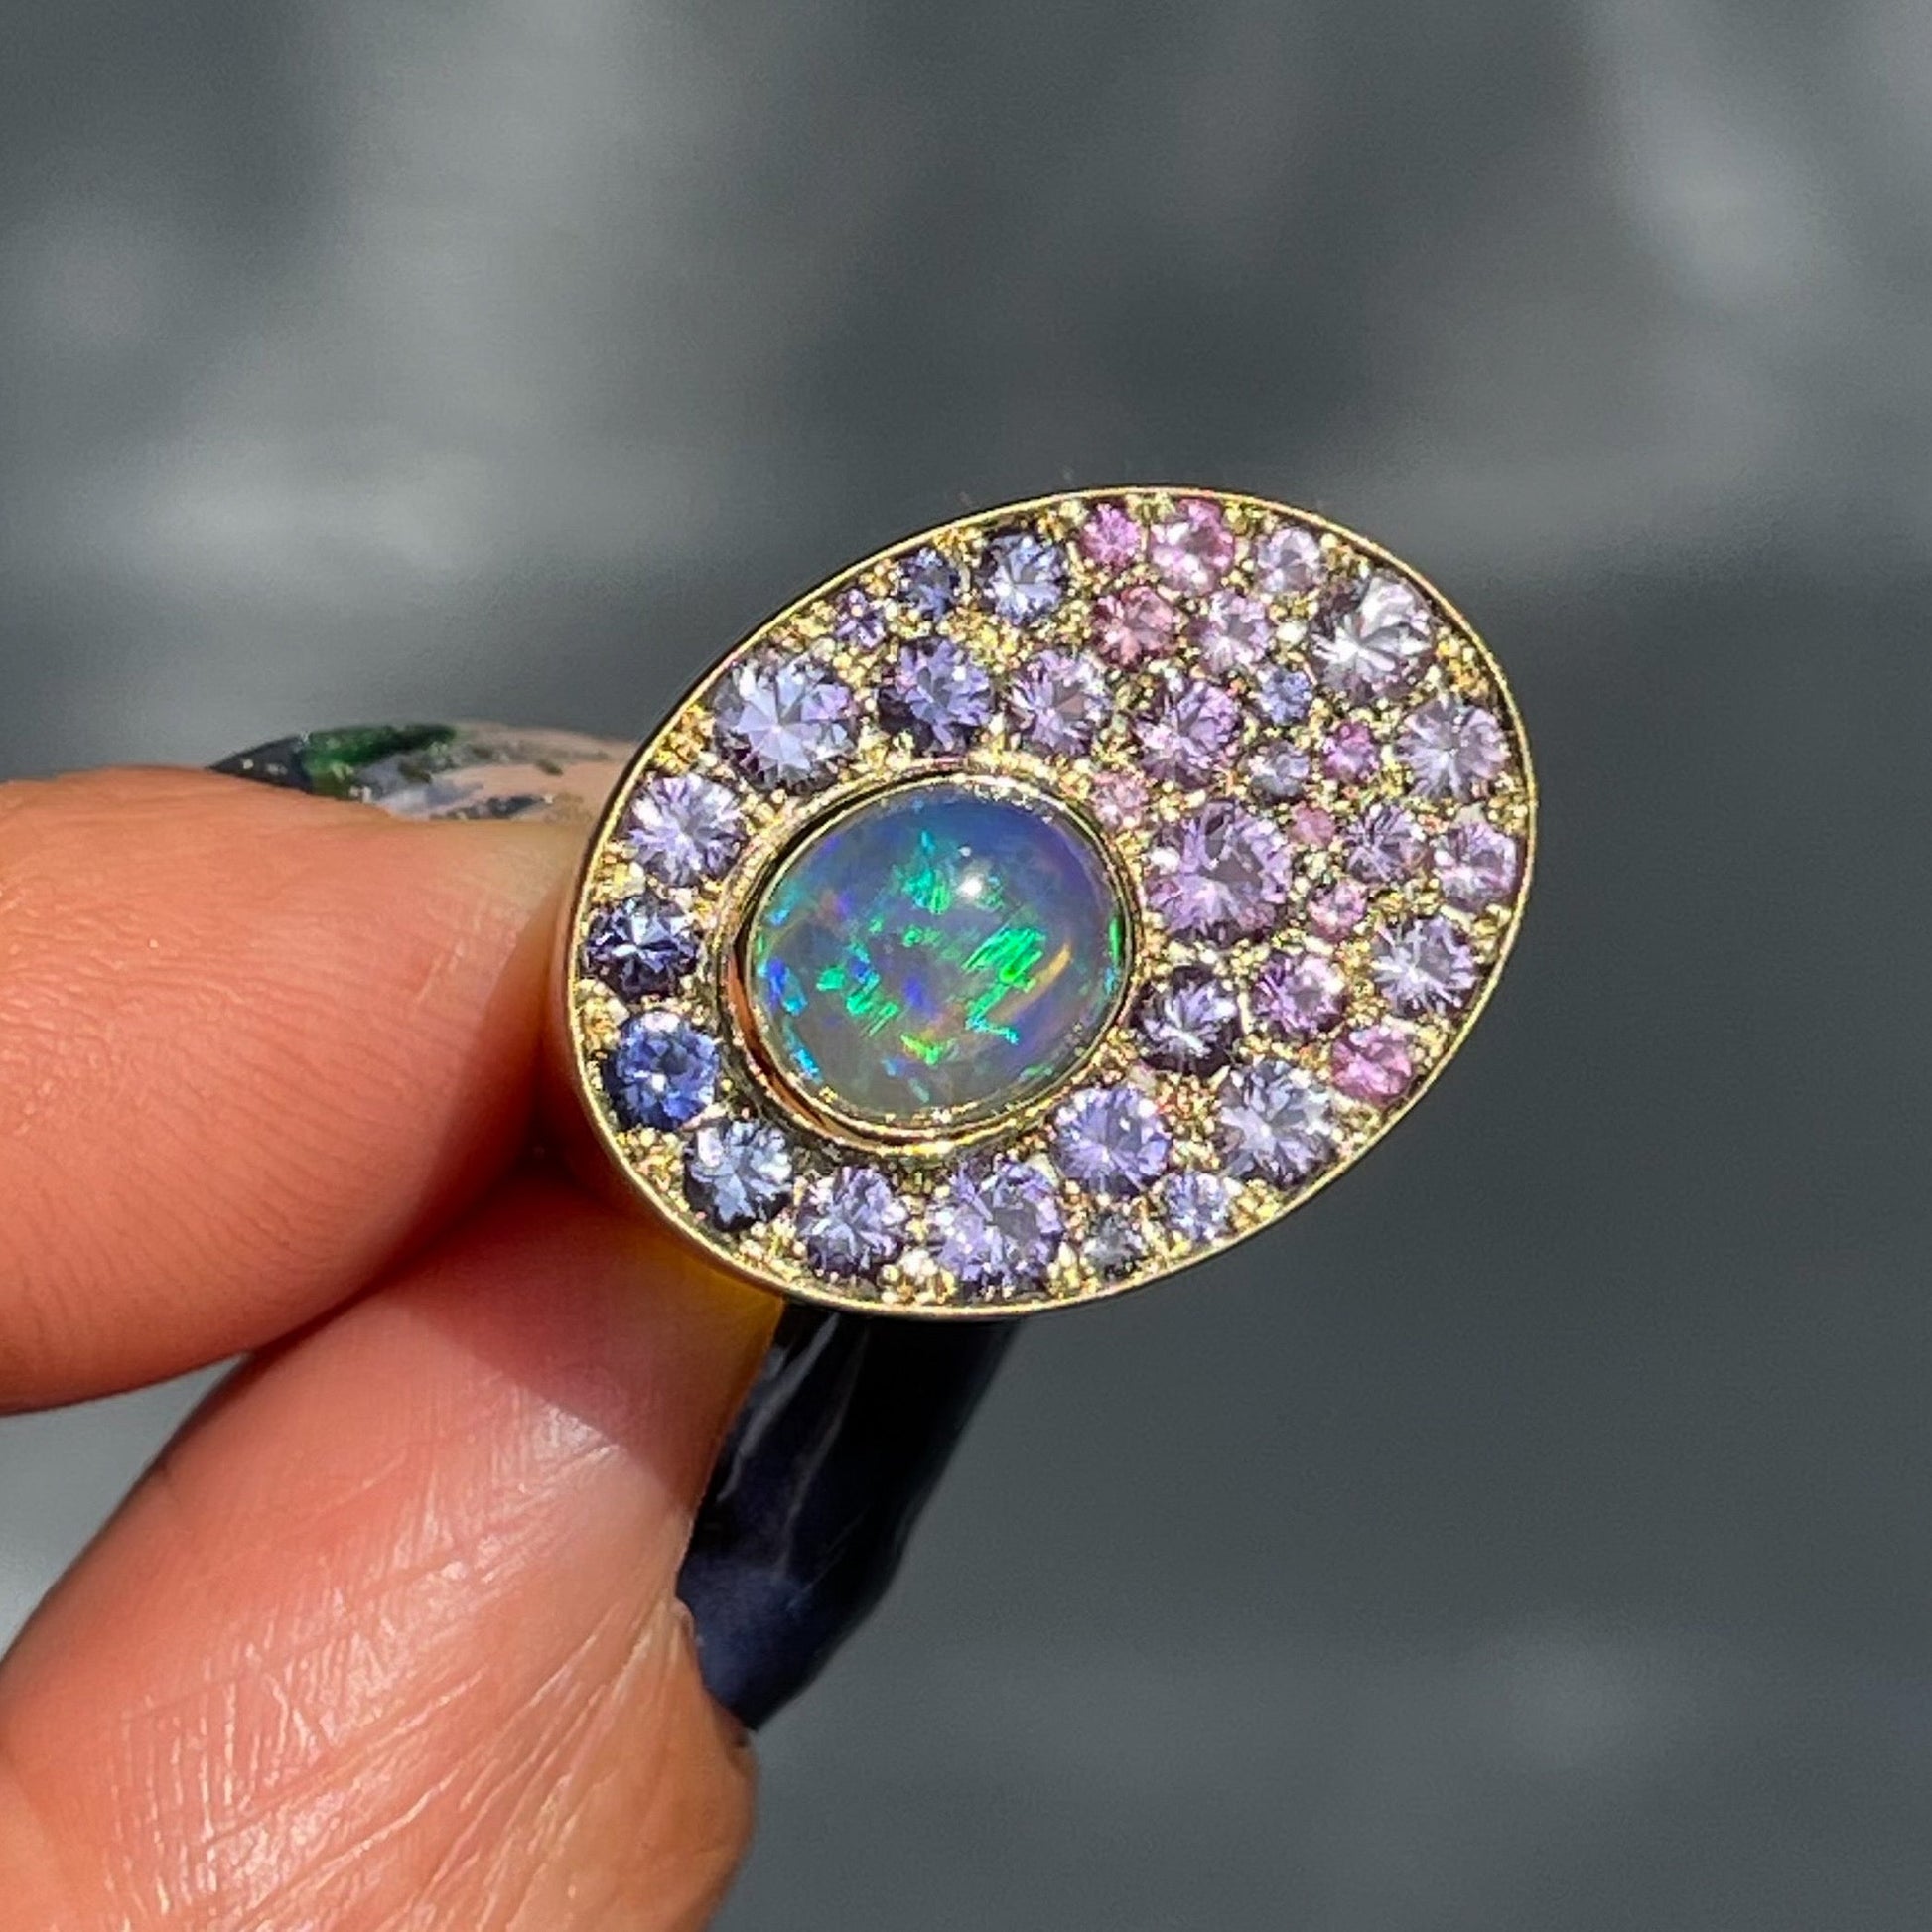 An Australian Opal Ring by NIXIN Jewelry held in front of a grey wall. The sapphire and opal ring is 14k gold.